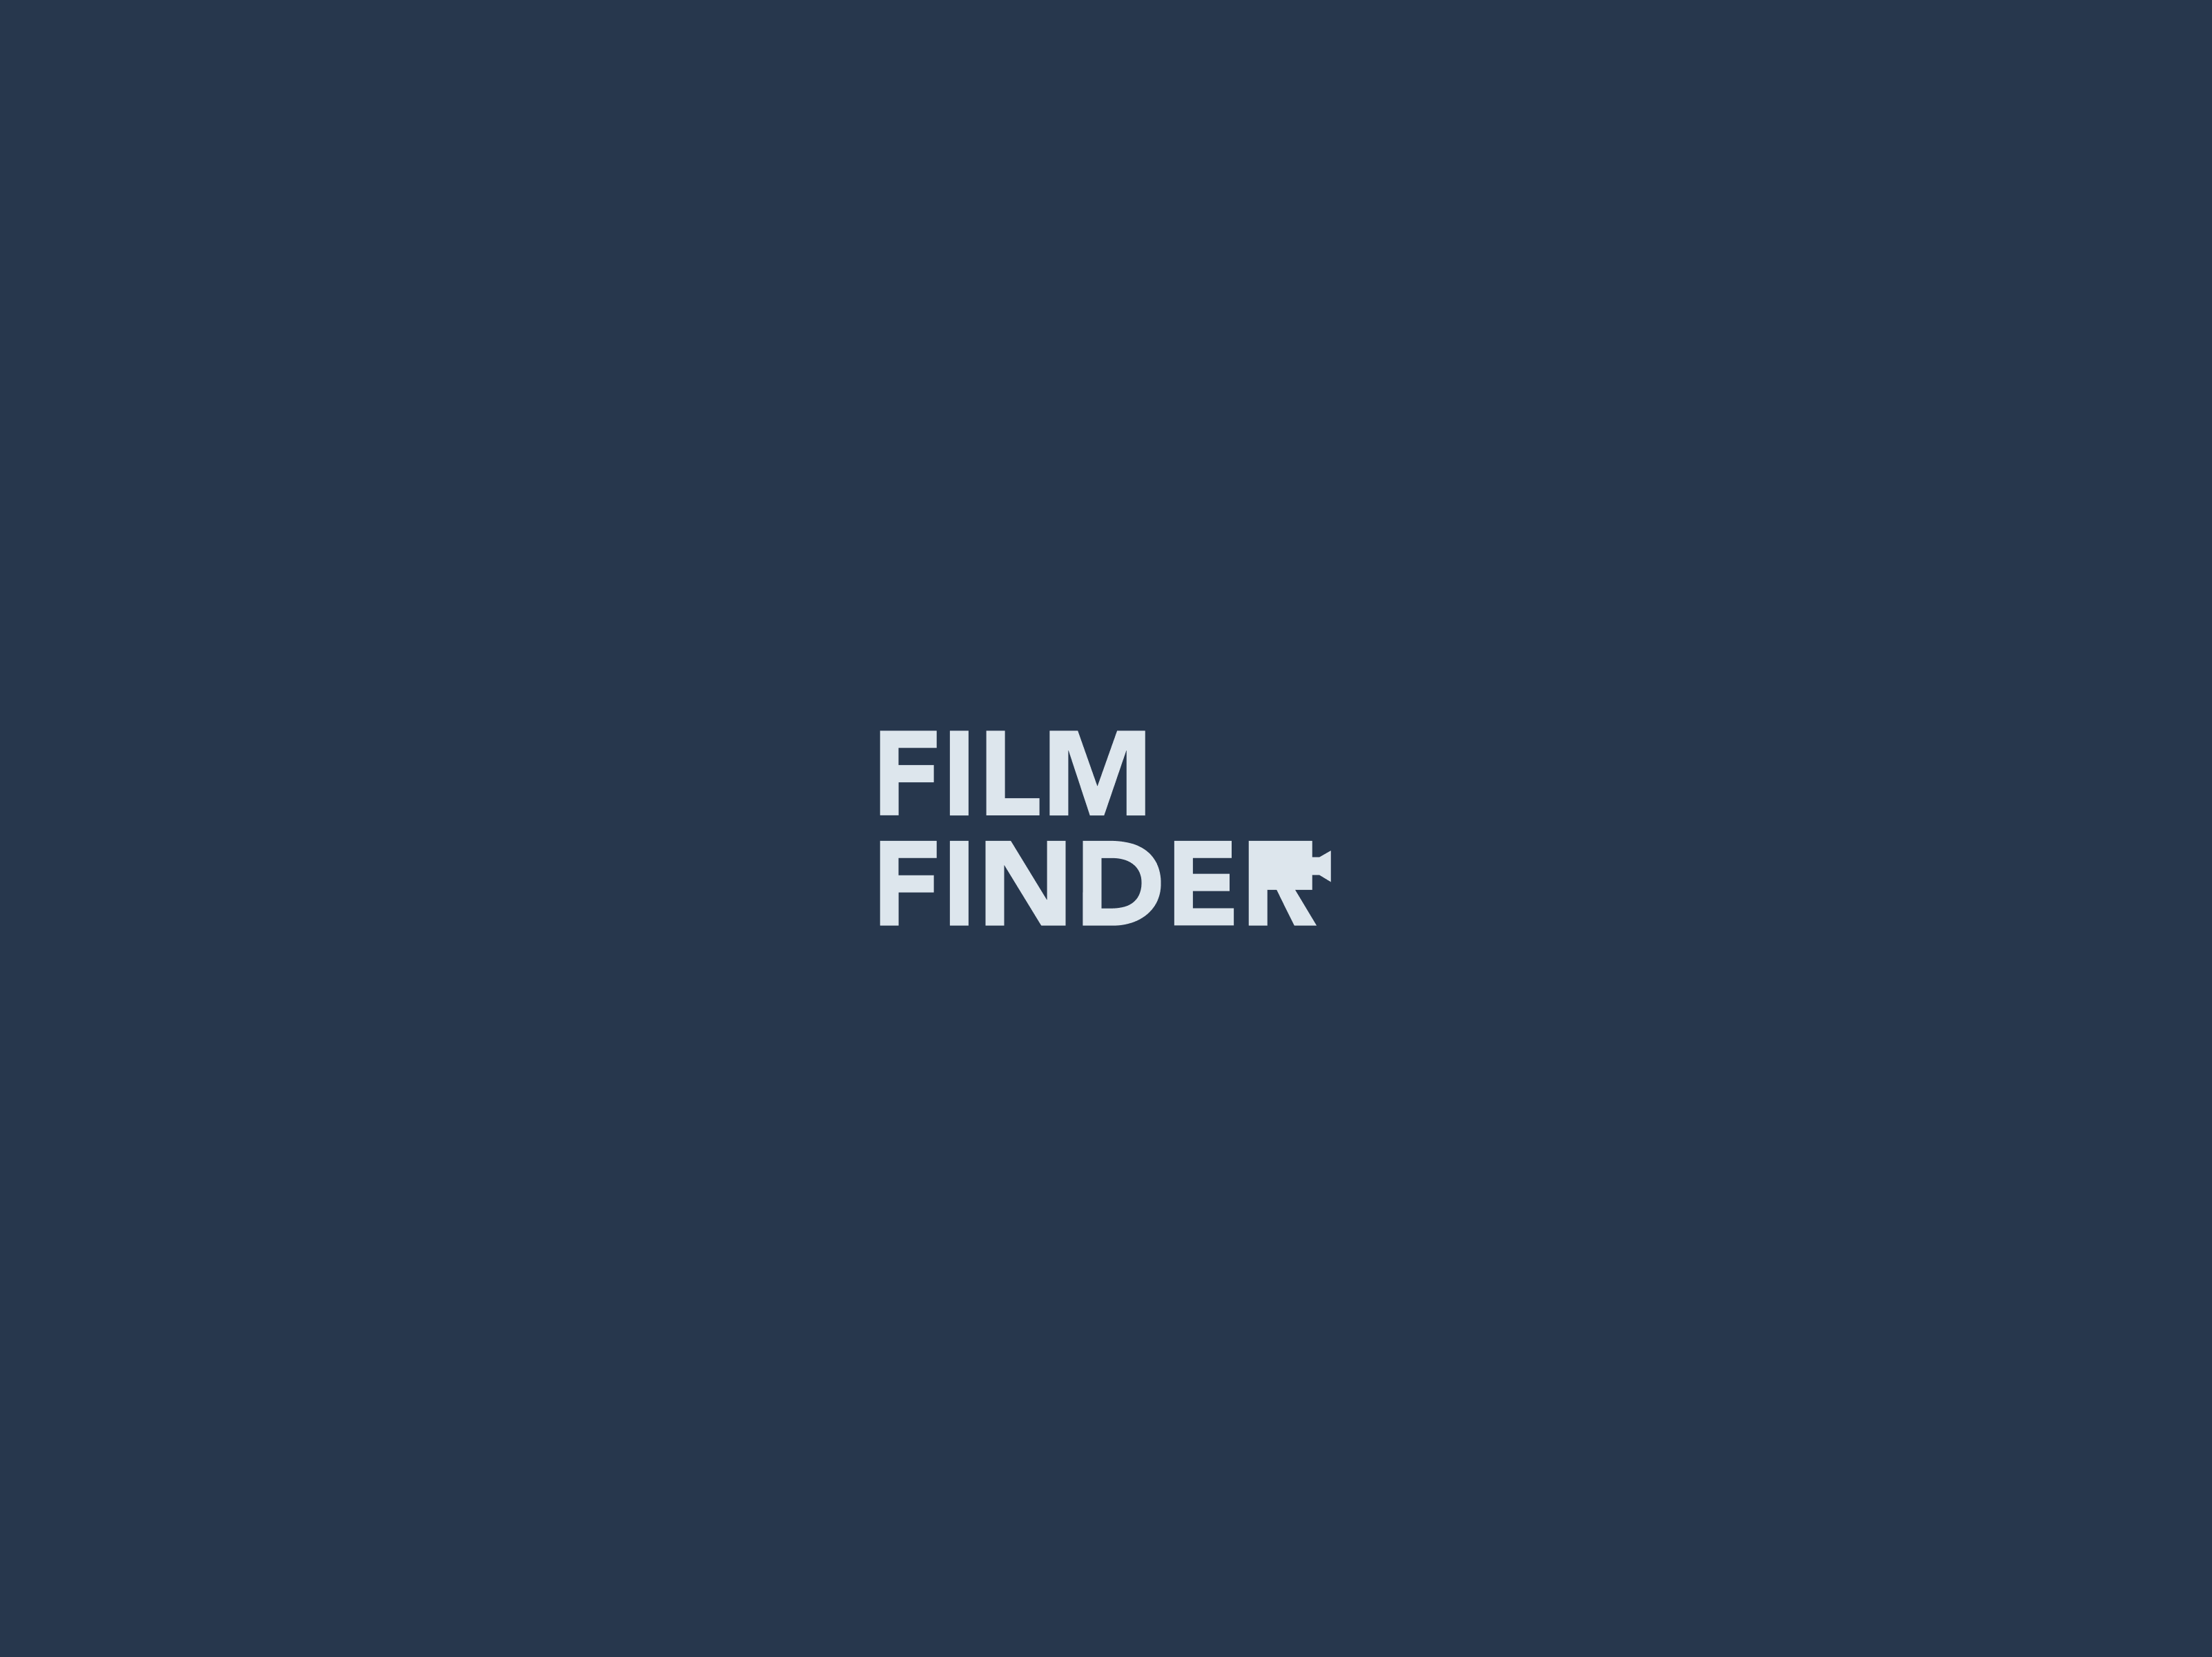 An image of the logo for a web app called Film Finder.